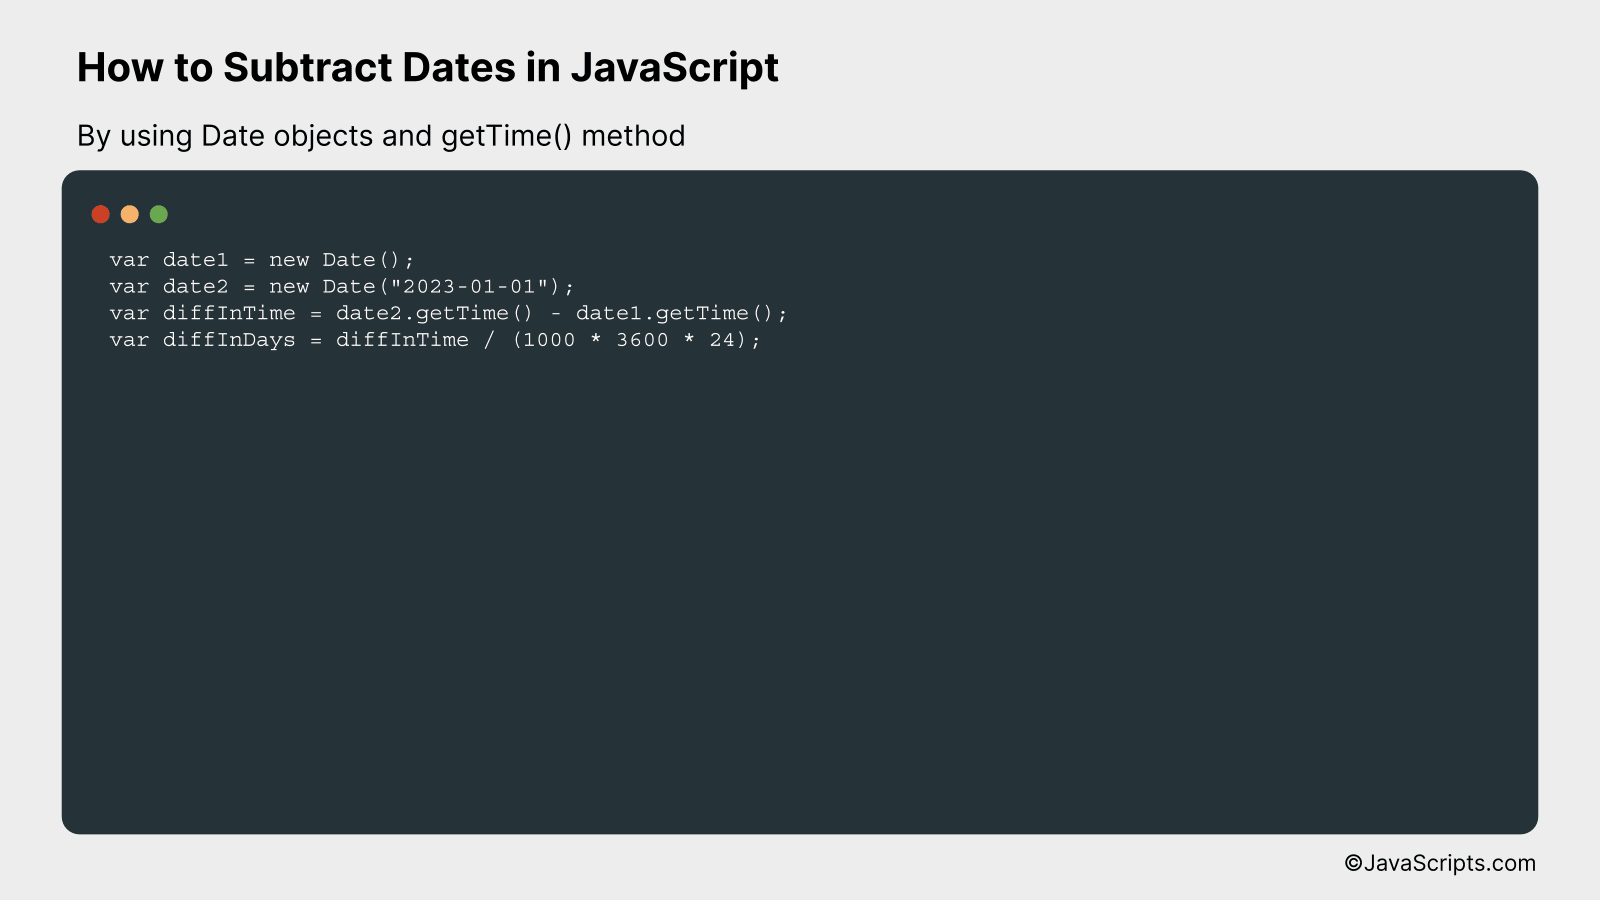 By using Date objects and getTime() method